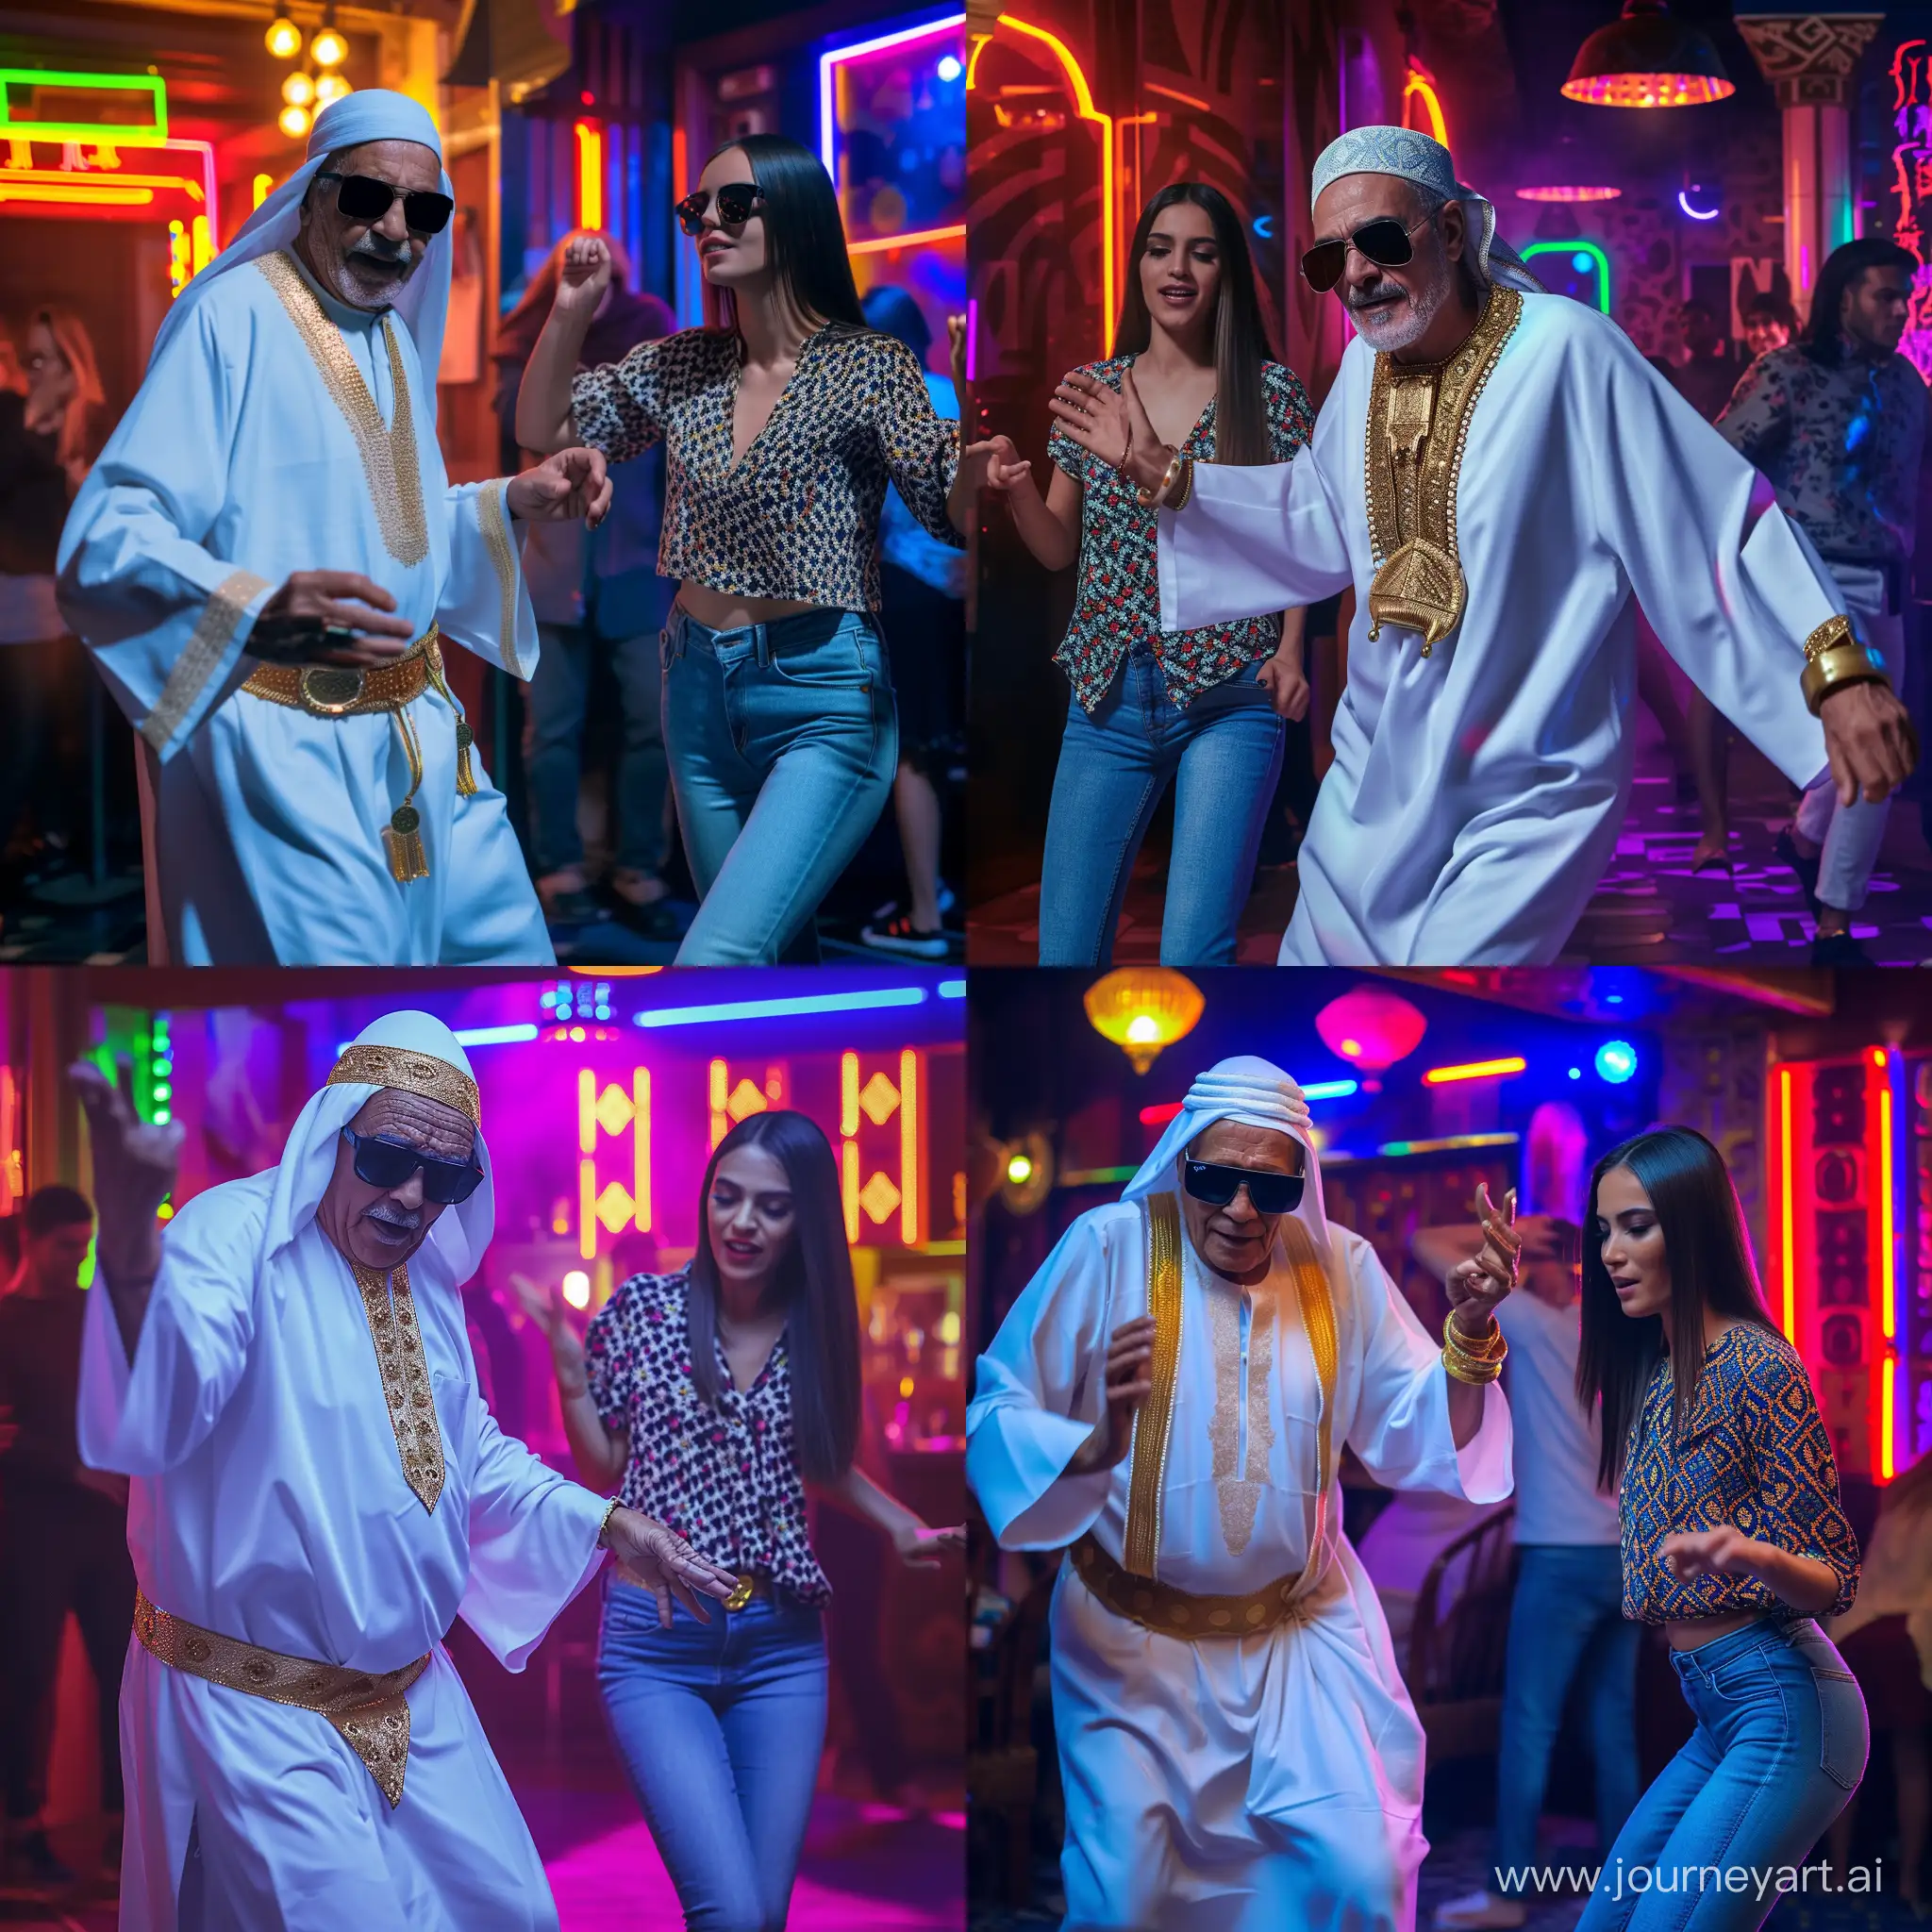 Imagine prompt: A Moroccan elder in traditional white jellabah, and gold accessories,  wearing dark sunglasses, joyous in a vibrant nightclub atmosphere, a girl in a patterned blouse and jeans, straight dark hair dances freely nearby, clearly apart. Both are dancing with hands up. Background has club-goers and neon lights. Created Using: authentic traditional costume details, dim club lighting, vibrant neon colors, cultural attire detail, nightclub ambiance, clear separation of subjects, HD quality, natural look --ar 1:1 --v 6.0 --ar 3:4 --no 99332